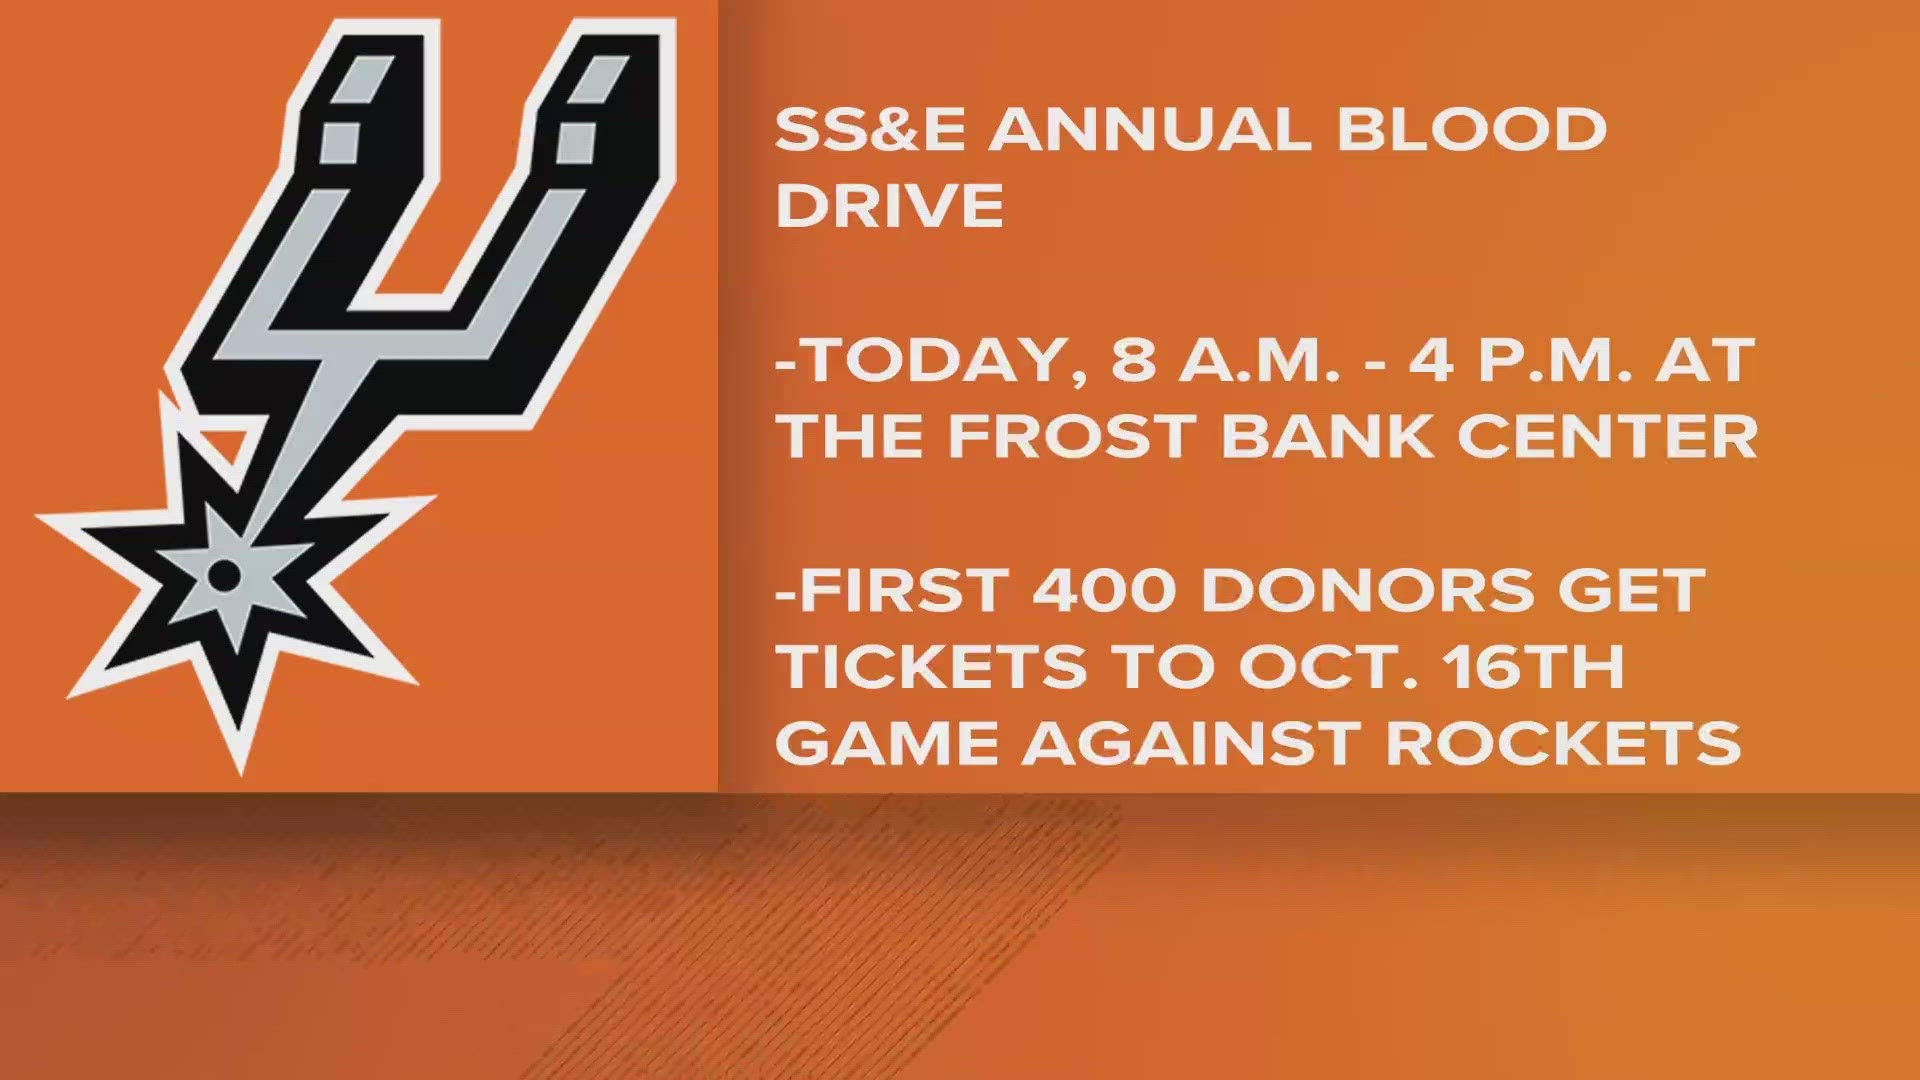 Donors will be given free tickets for the Spurs game on October 16, along with a Halloween Boo Crew t-shirt, in exchange for donating blood.